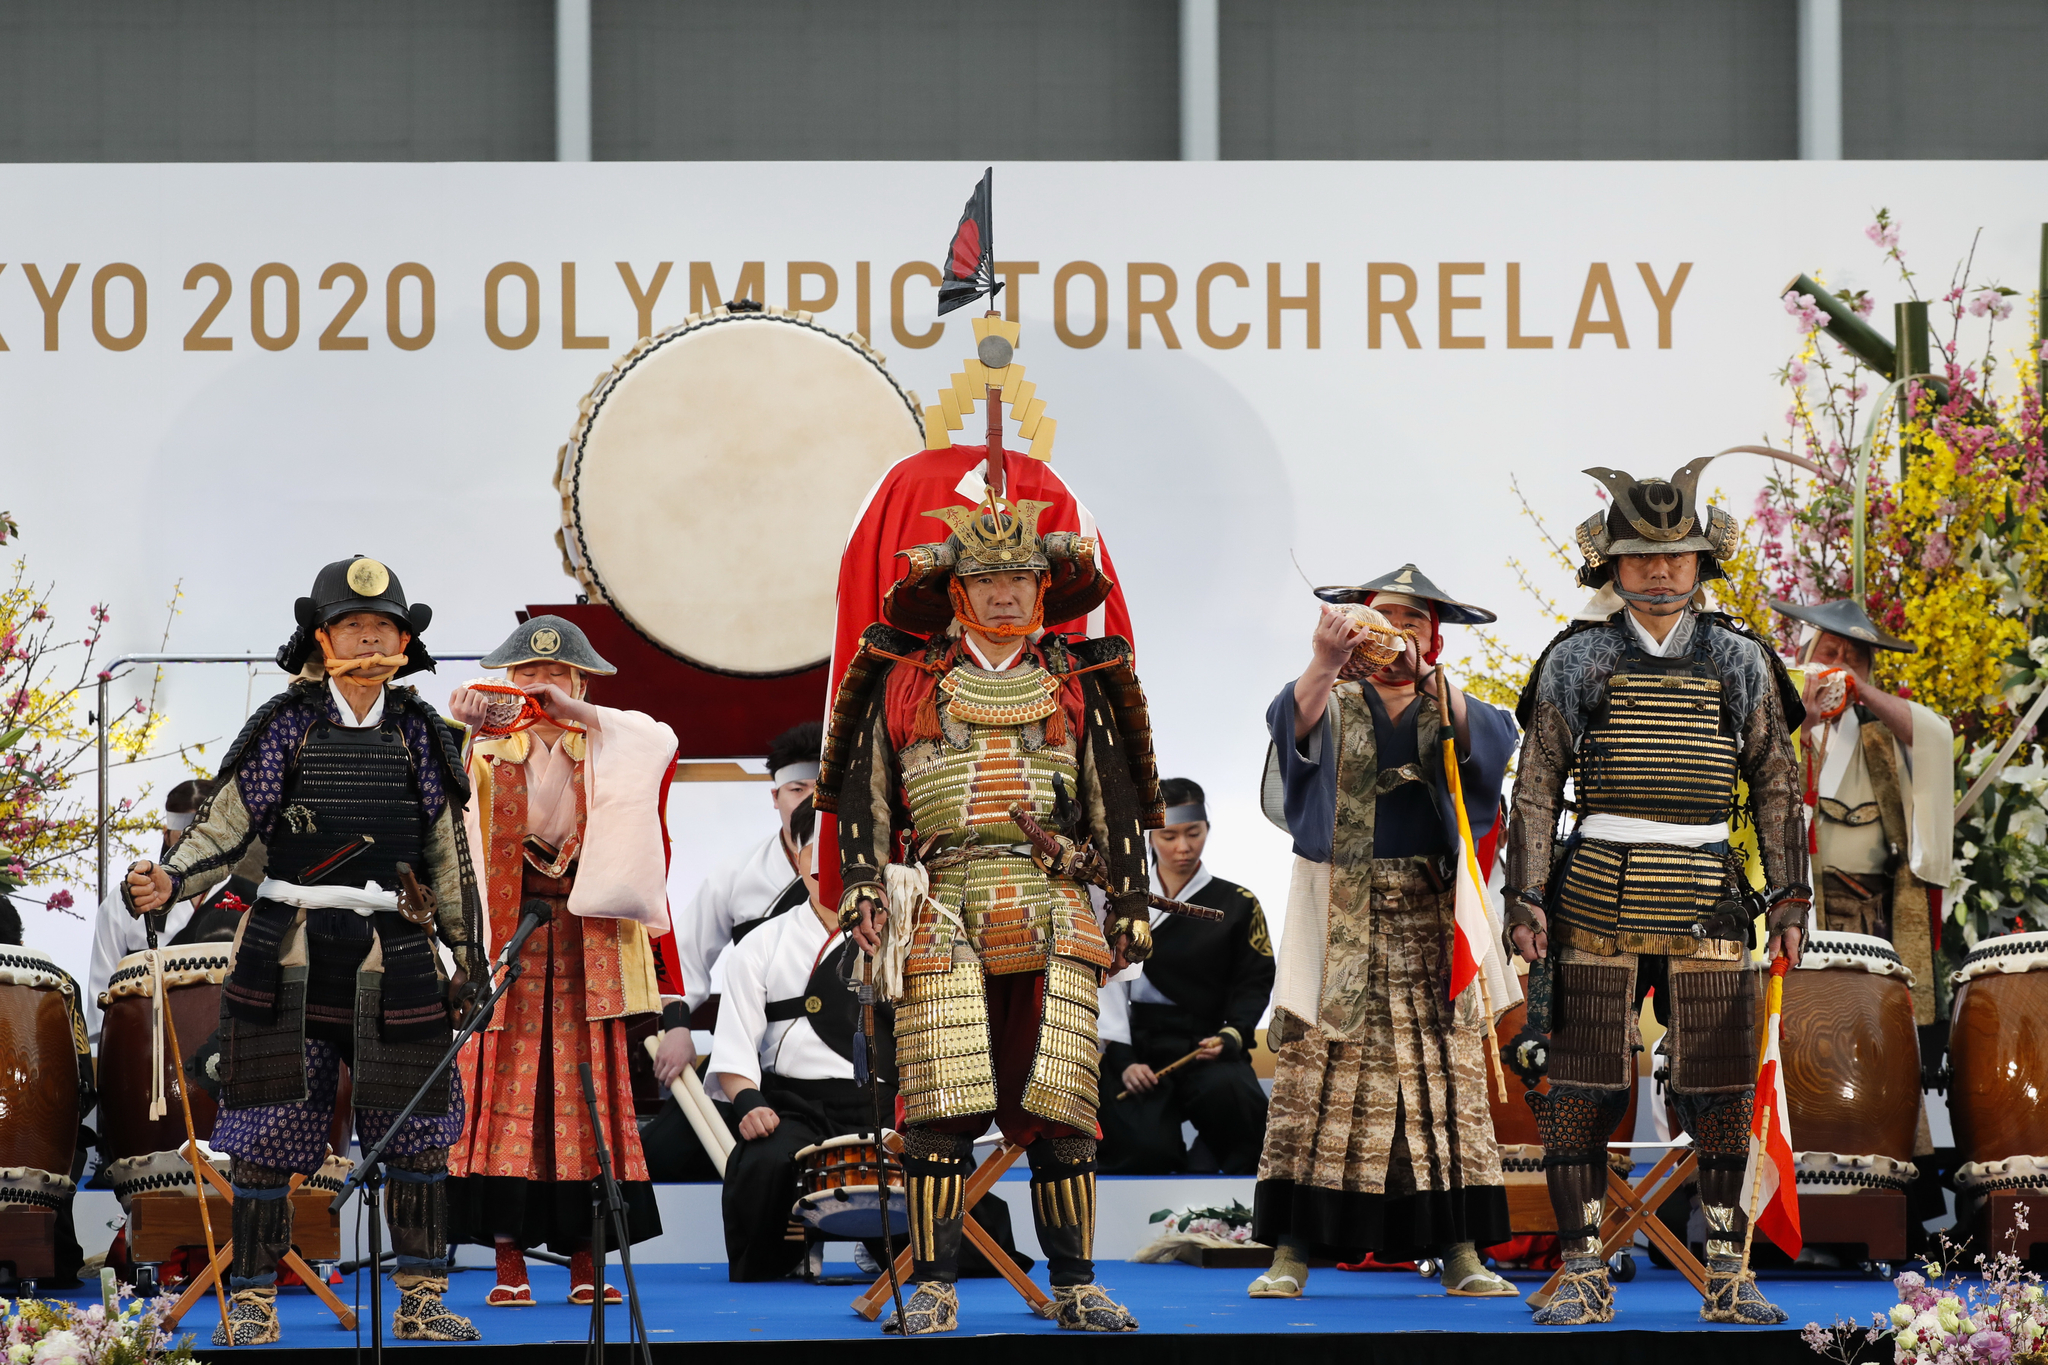 Tokyo Olympic torch relay, departing from Fukushima, where the earthquake occurred 10 years ago